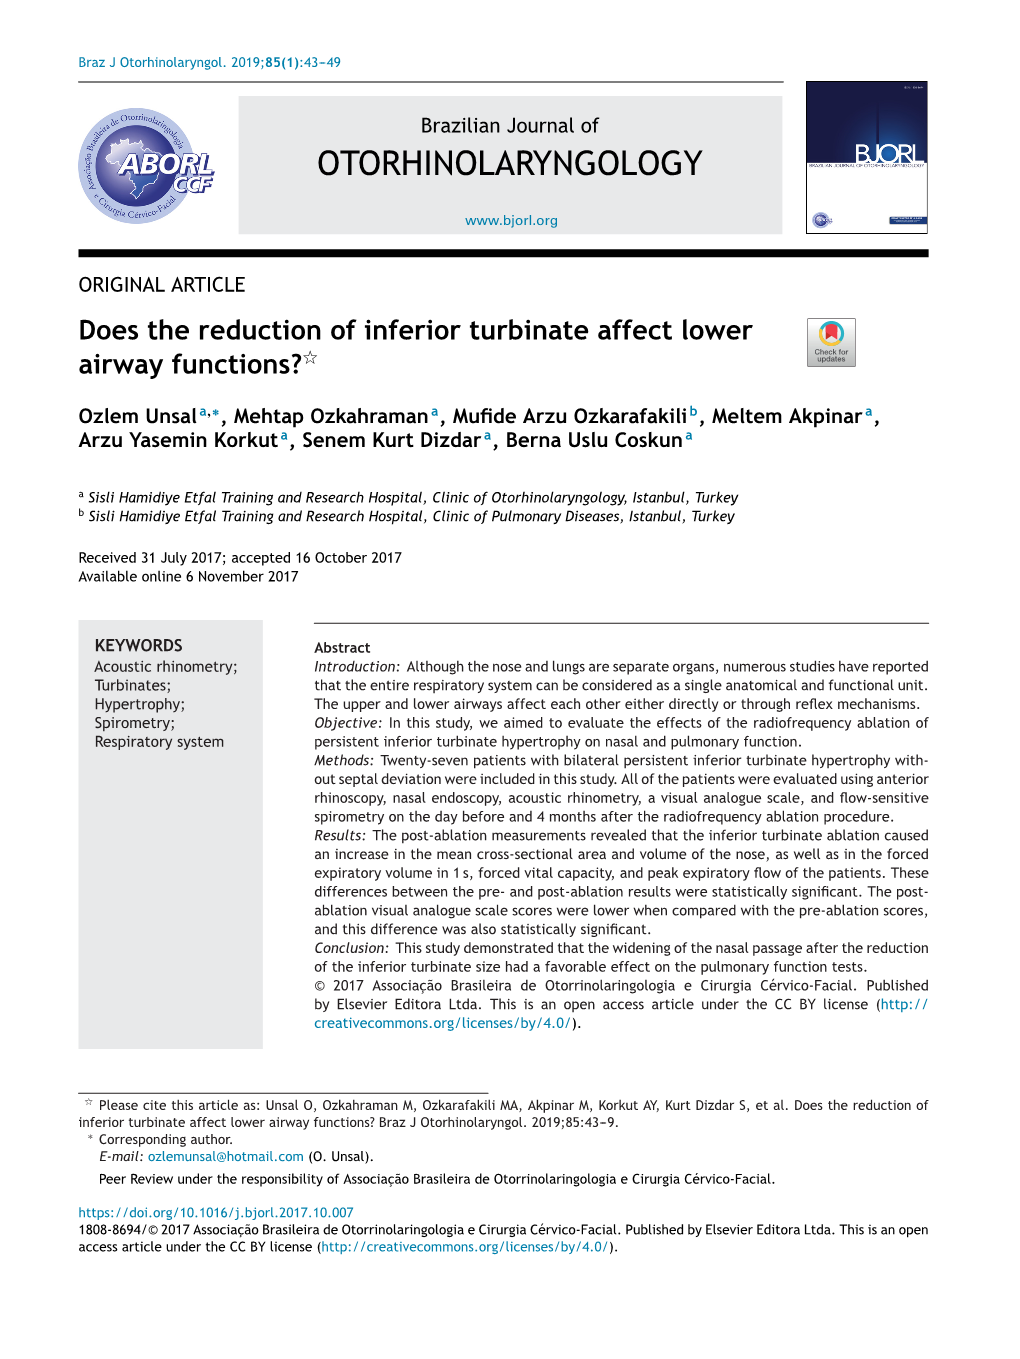 Does the Reduction of Inferior Turbinate Affect Lower Airway Functions?